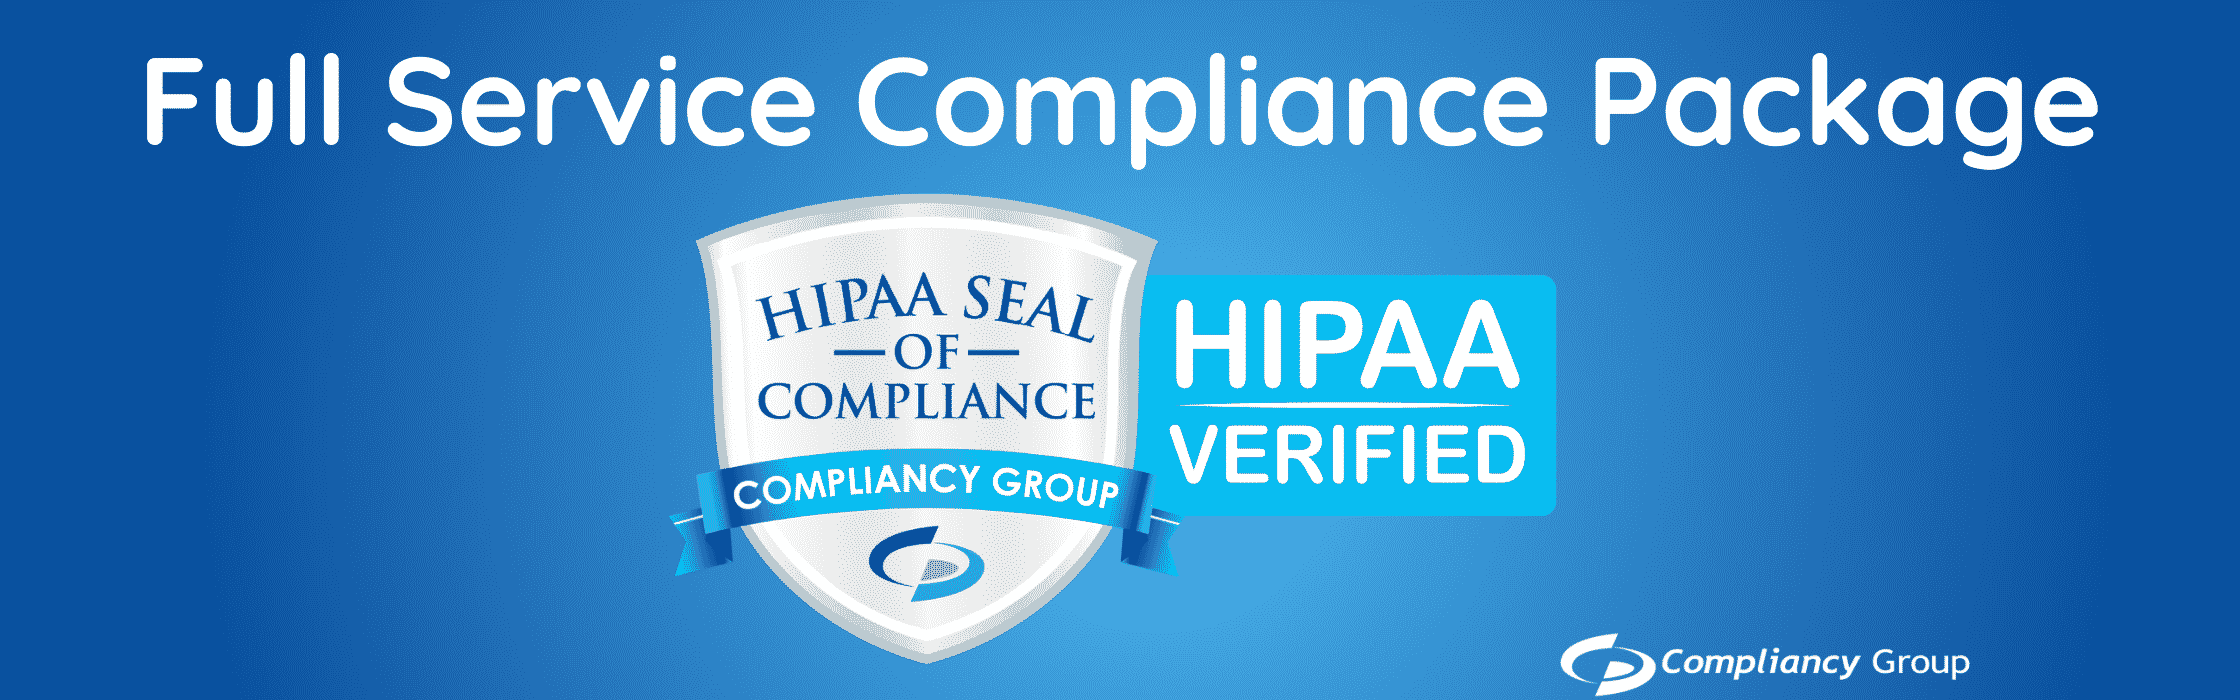 Full Service Compliance Package